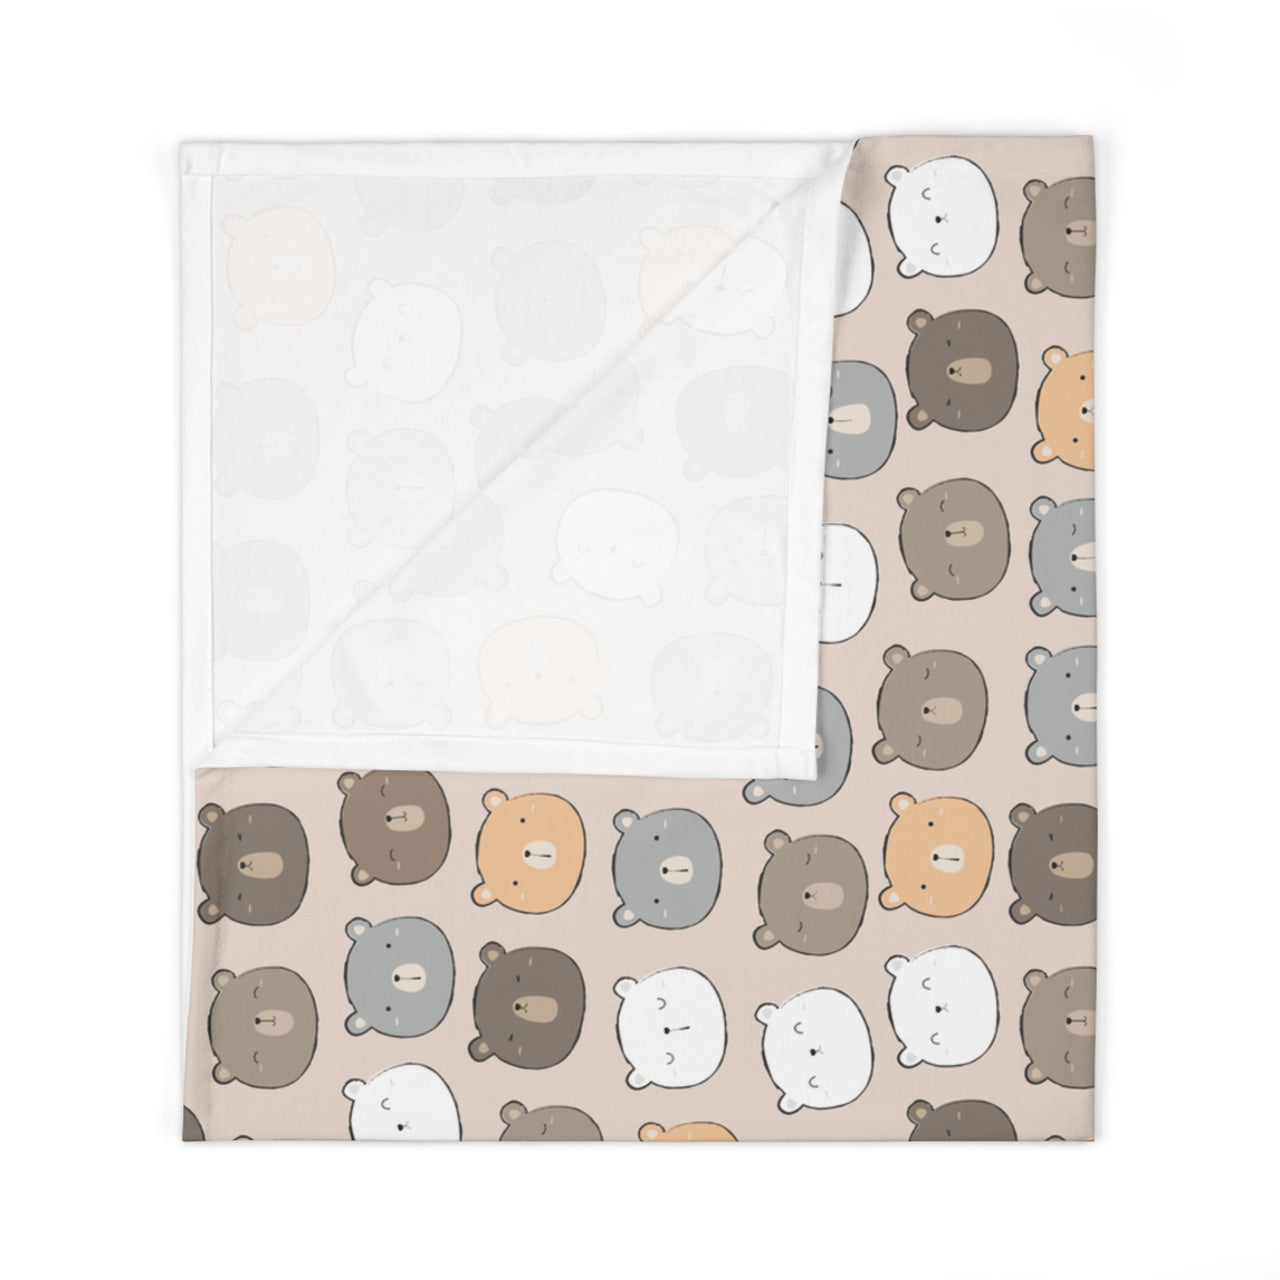 Personalized Cute Baby Unisex Brown Bears Swaddle Blanket - CHILD DECOR LLC